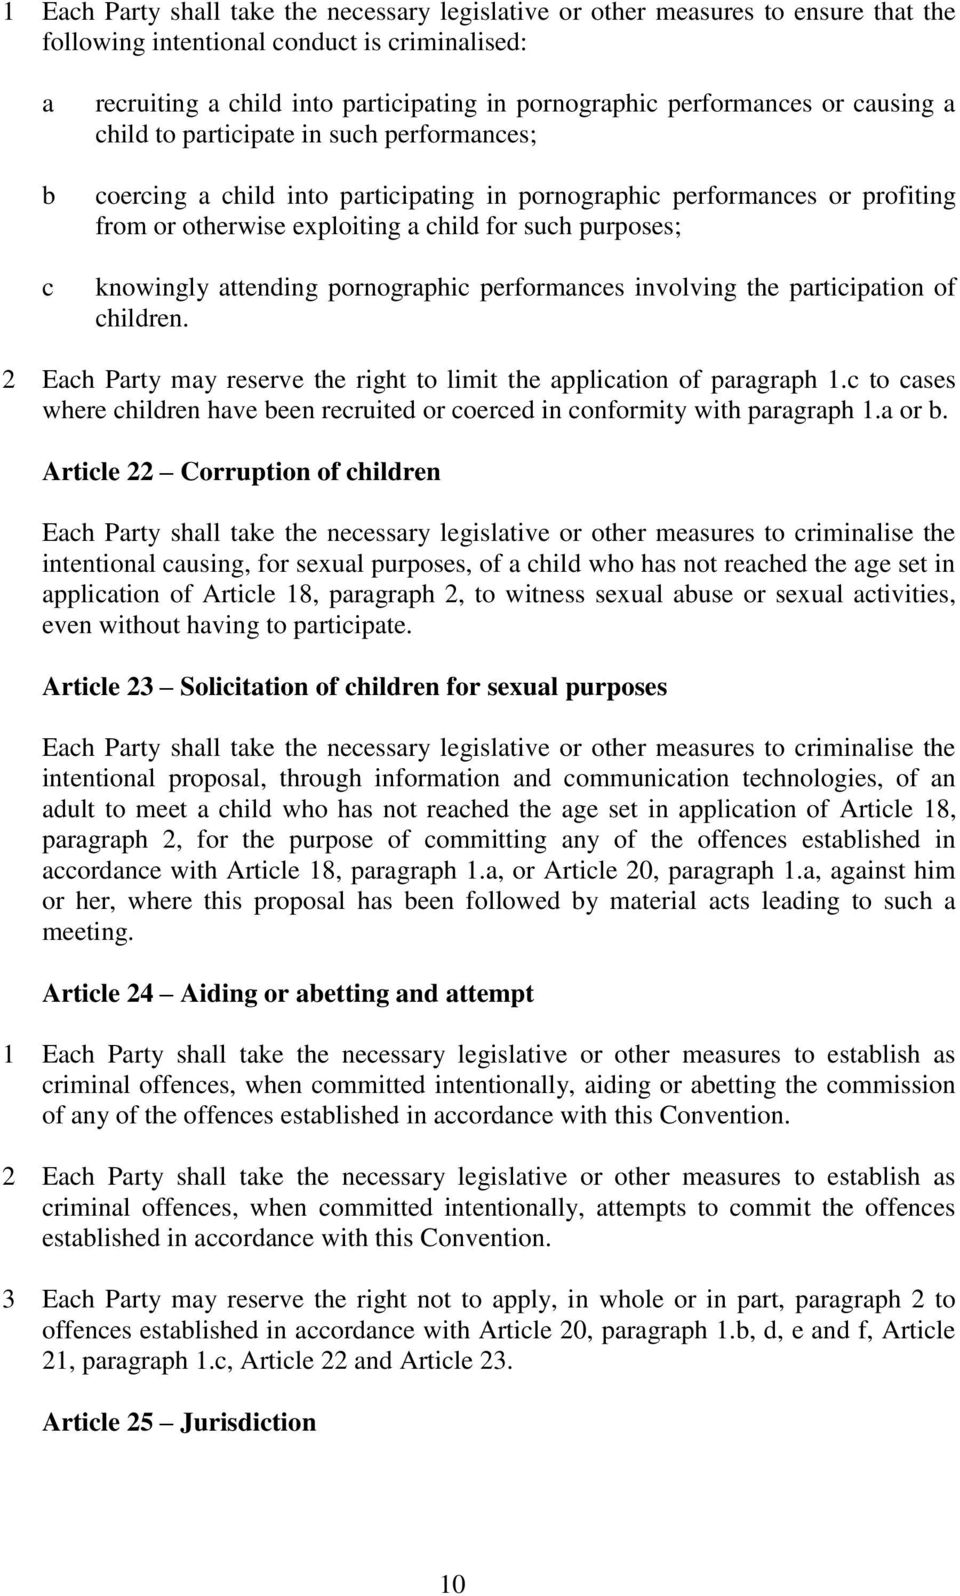 purposes; knowingly attending pornographic performances involving the participation of children. 2 Each Party may reserve the right to limit the application of paragraph 1.